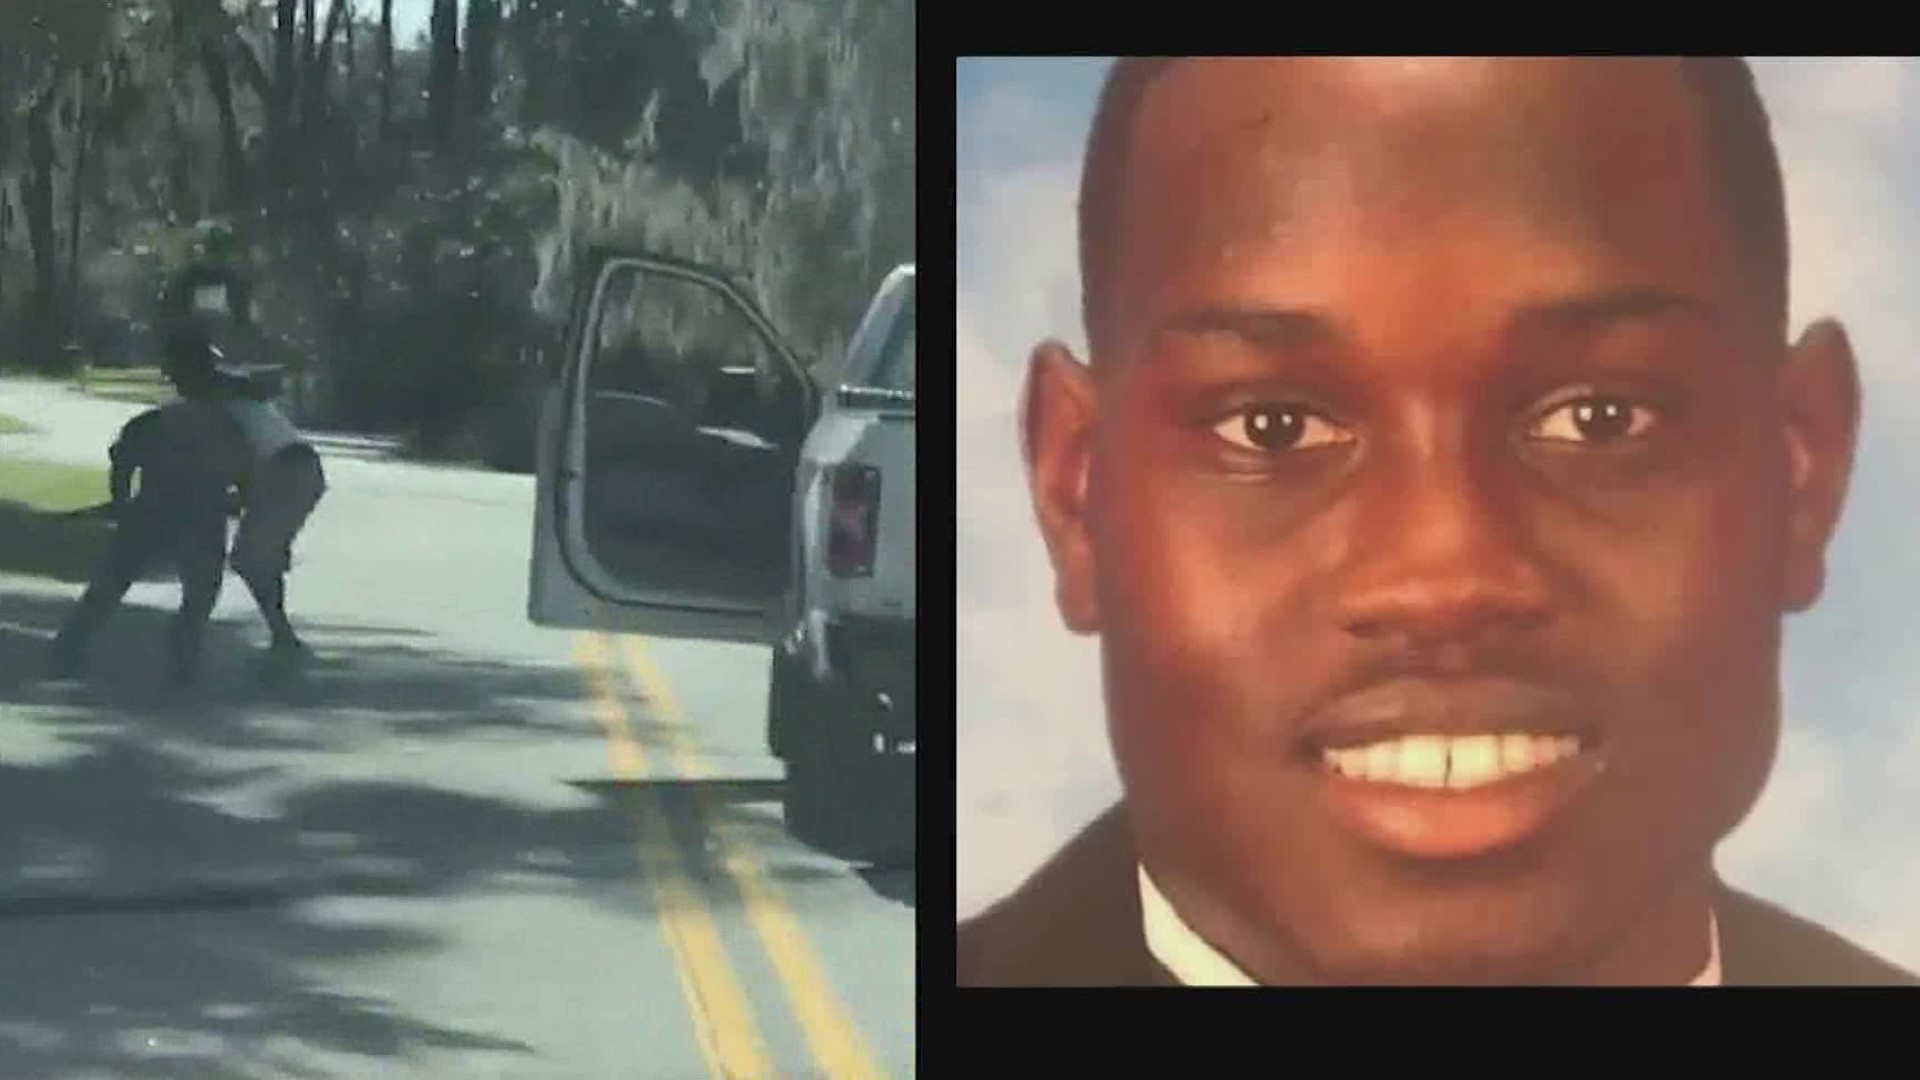 The video shows a car following Ahmad while he's jogging down a street before he is shot and killed. This video may be too graphic for some to watch.